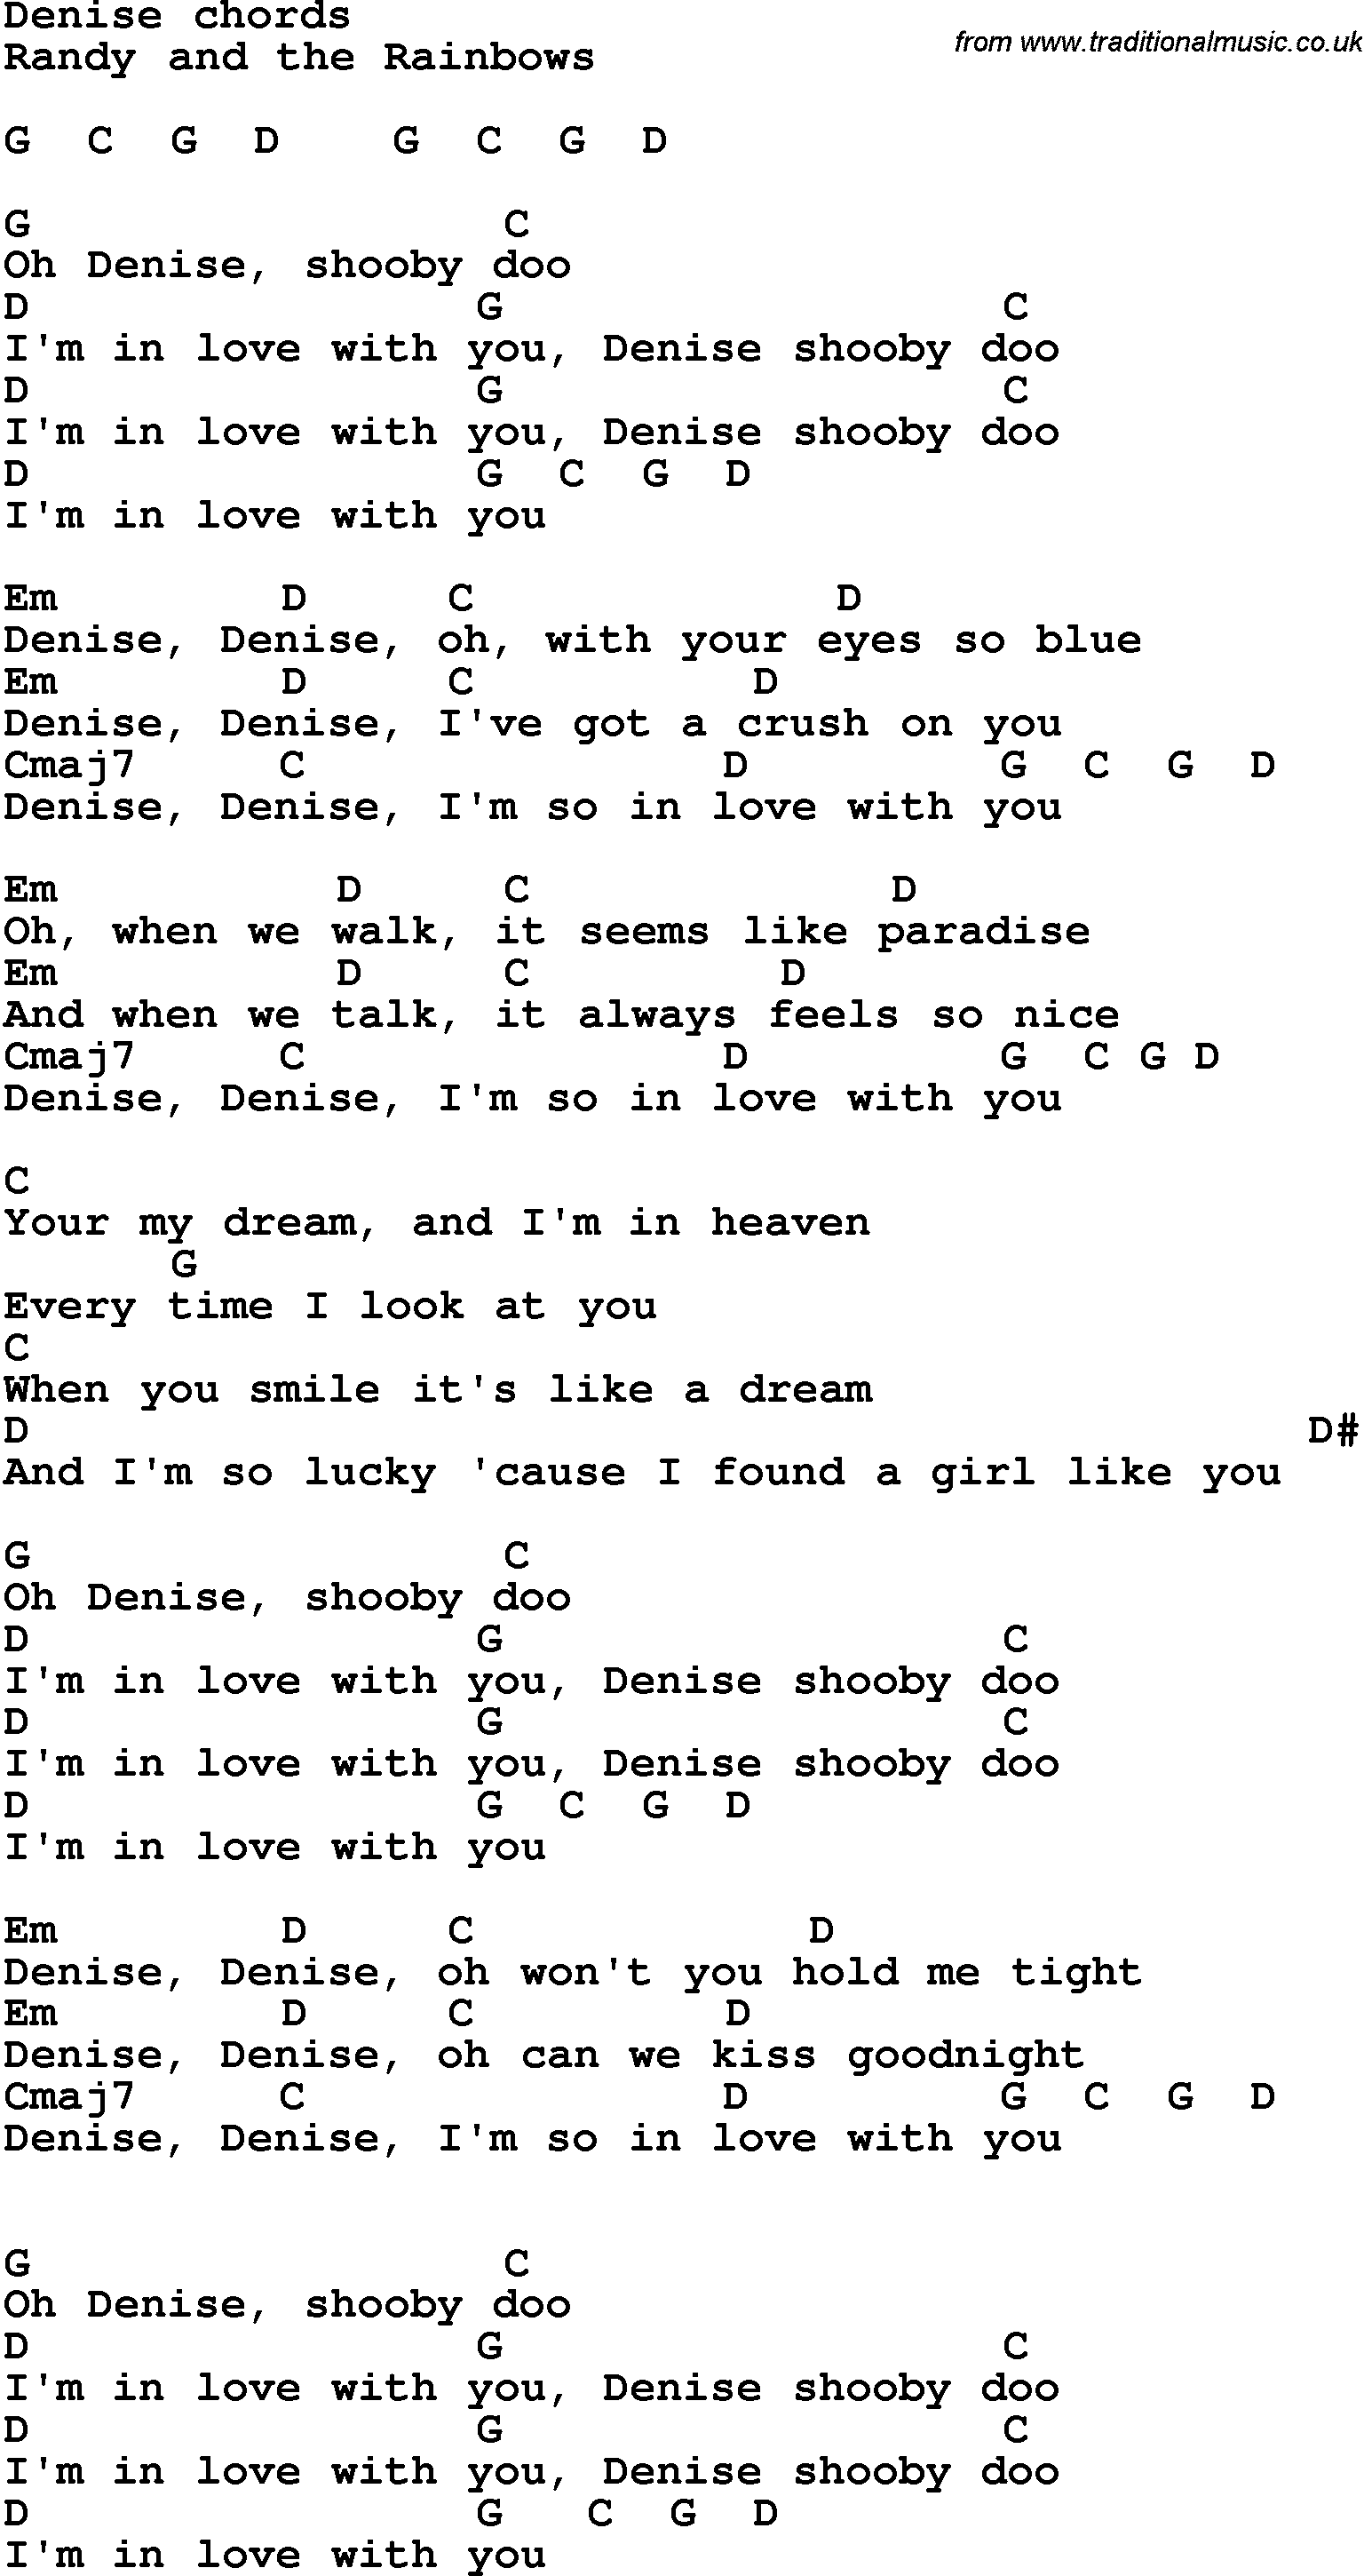 Song Lyrics with guitar chords for Denise